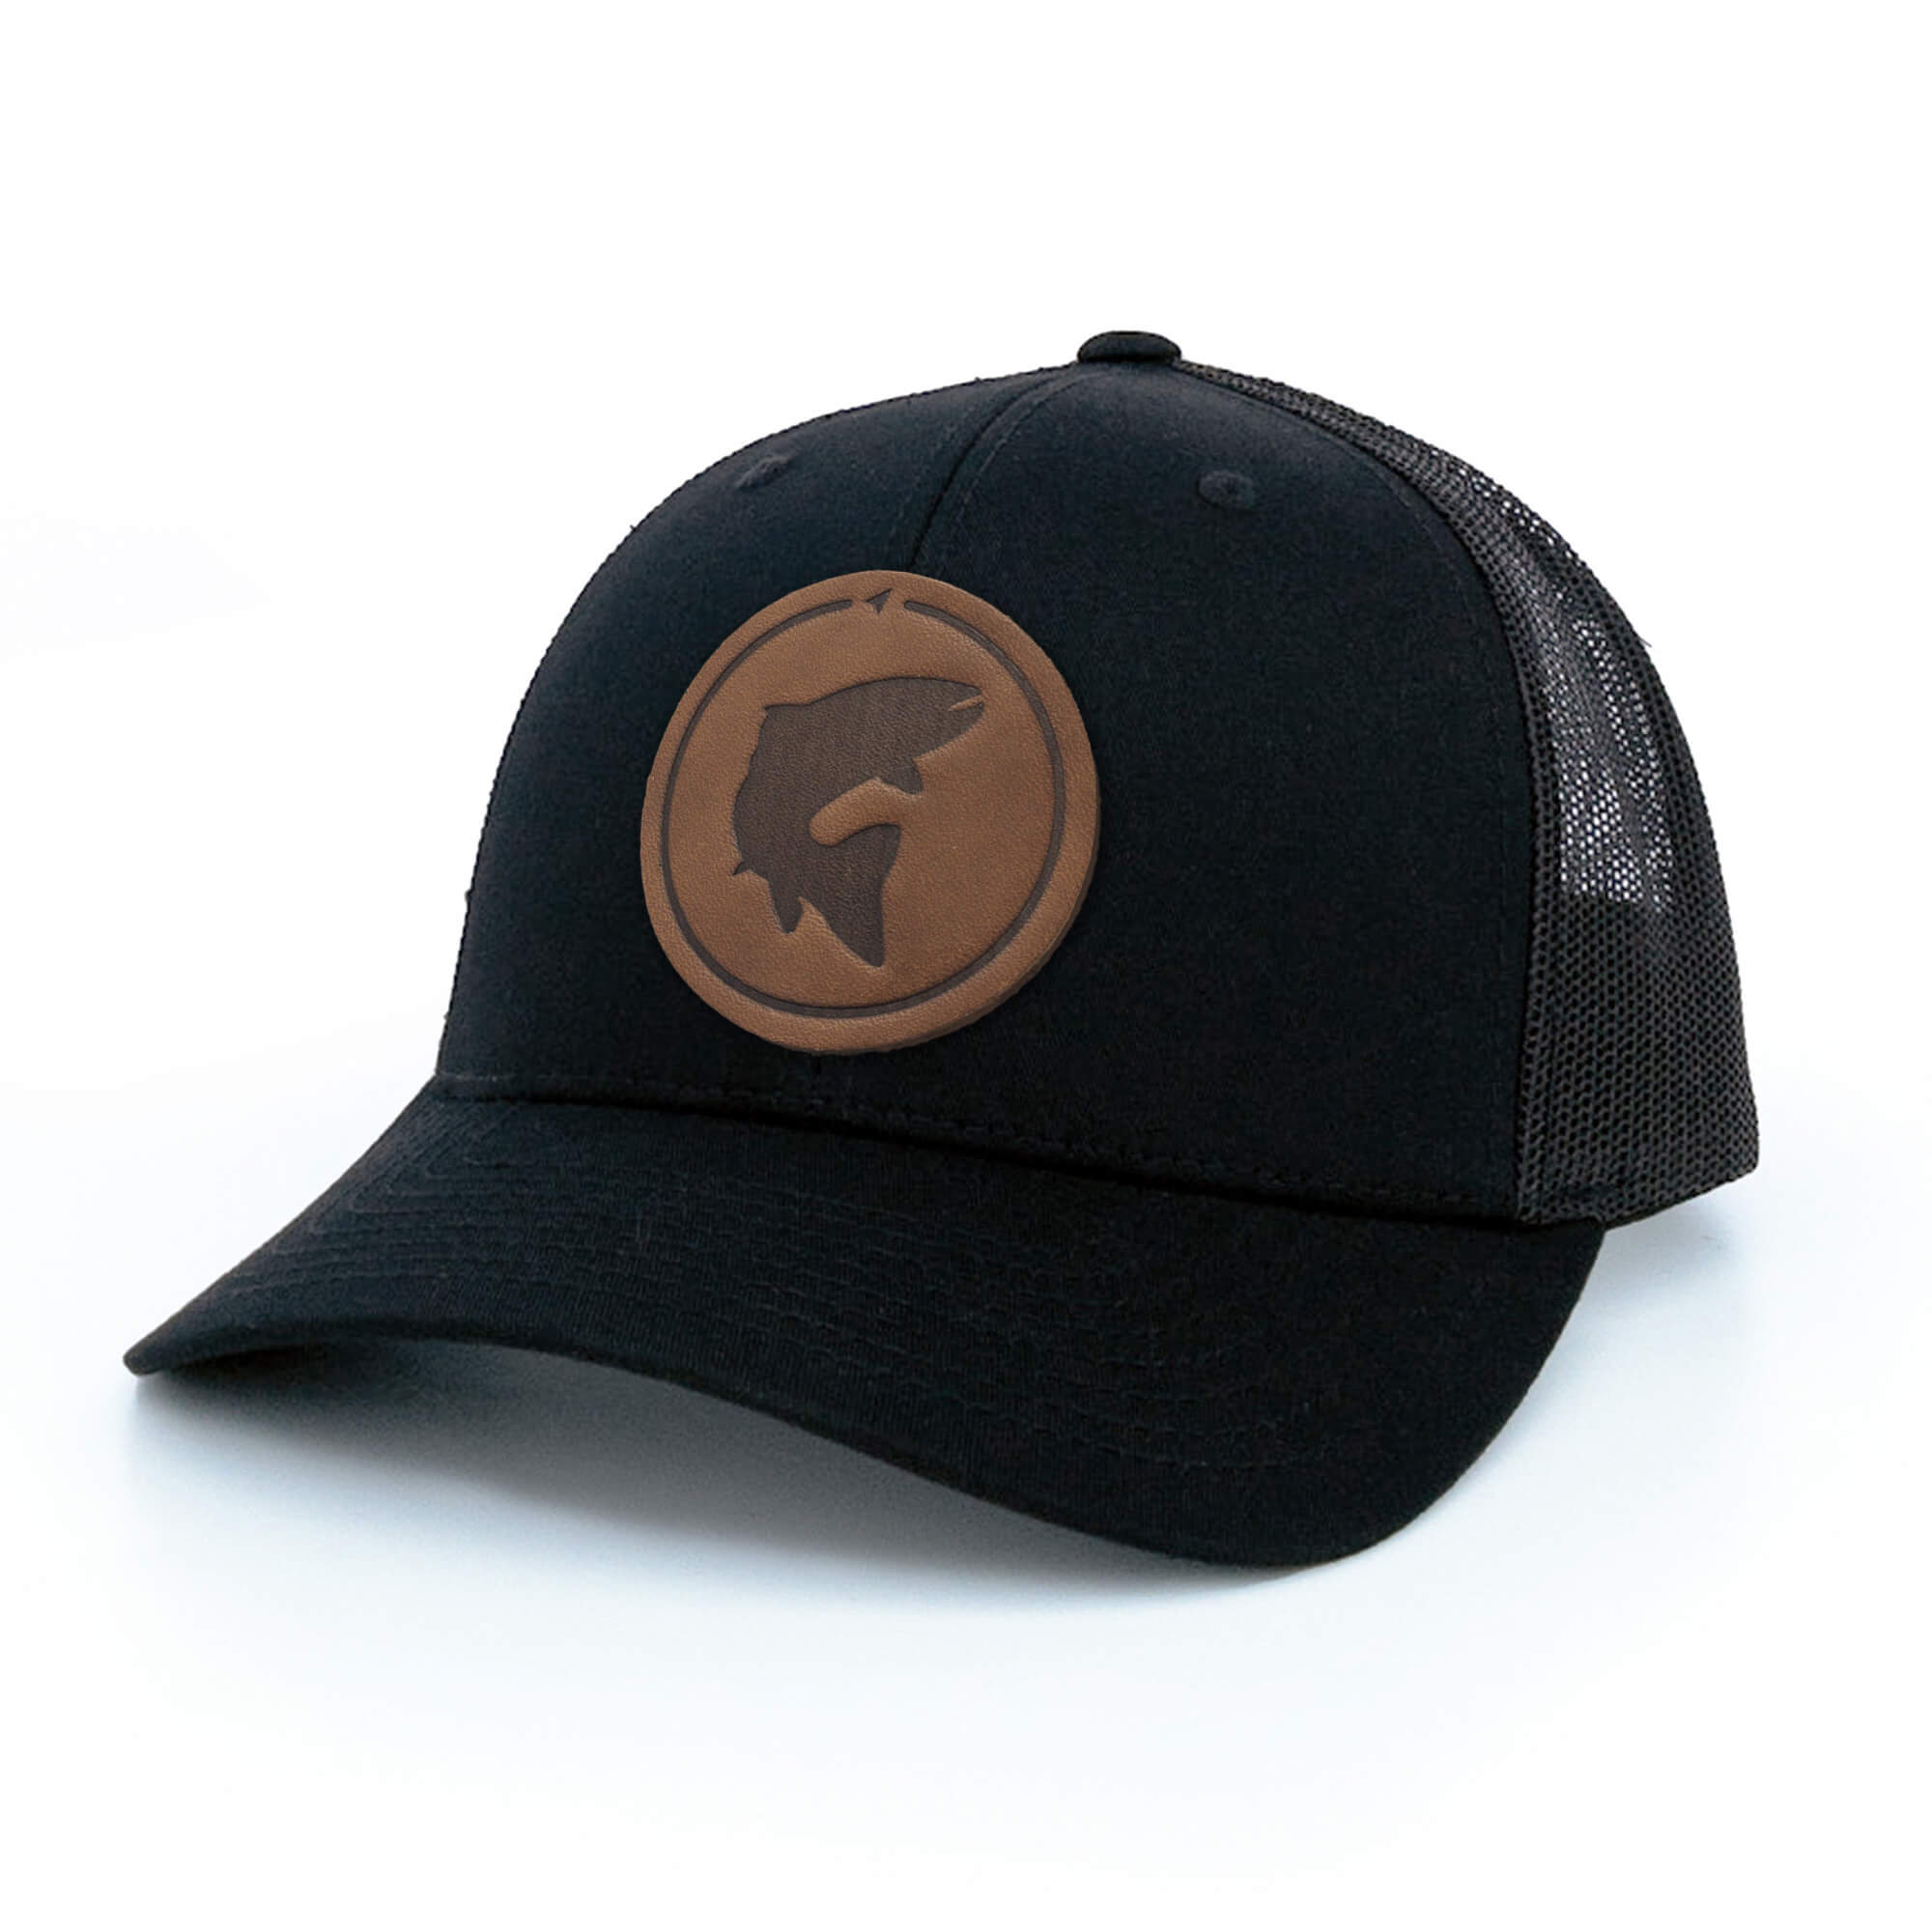 Black trucker hat with full-grain leather patch of a Trout | BLACK-004-001, CHARC-004-001, NAVY-004-001, HGREY-004-001, MOSS-004-001, BROWN-004-001